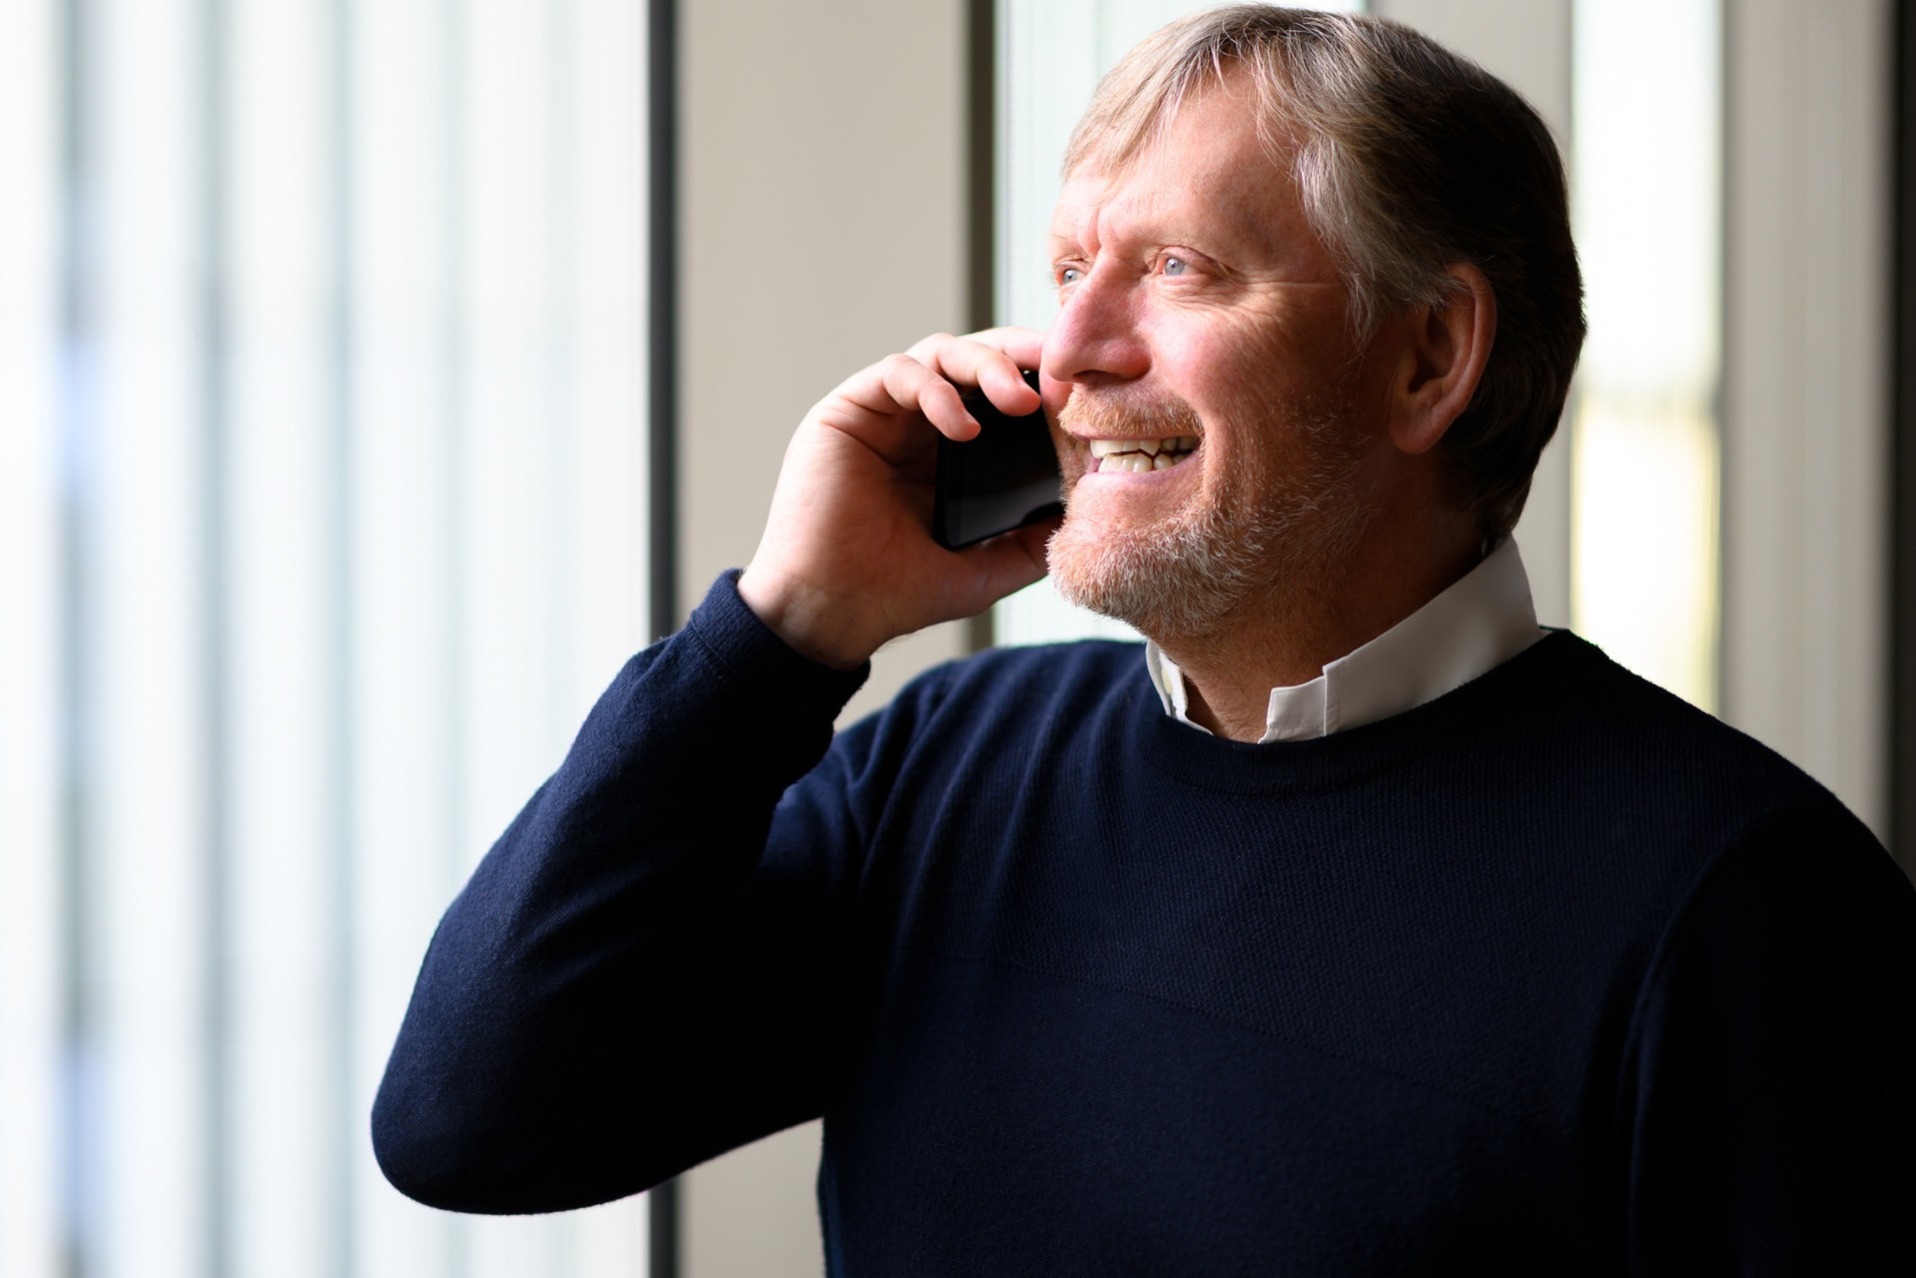 An Itseeze consultant takes a call from a client